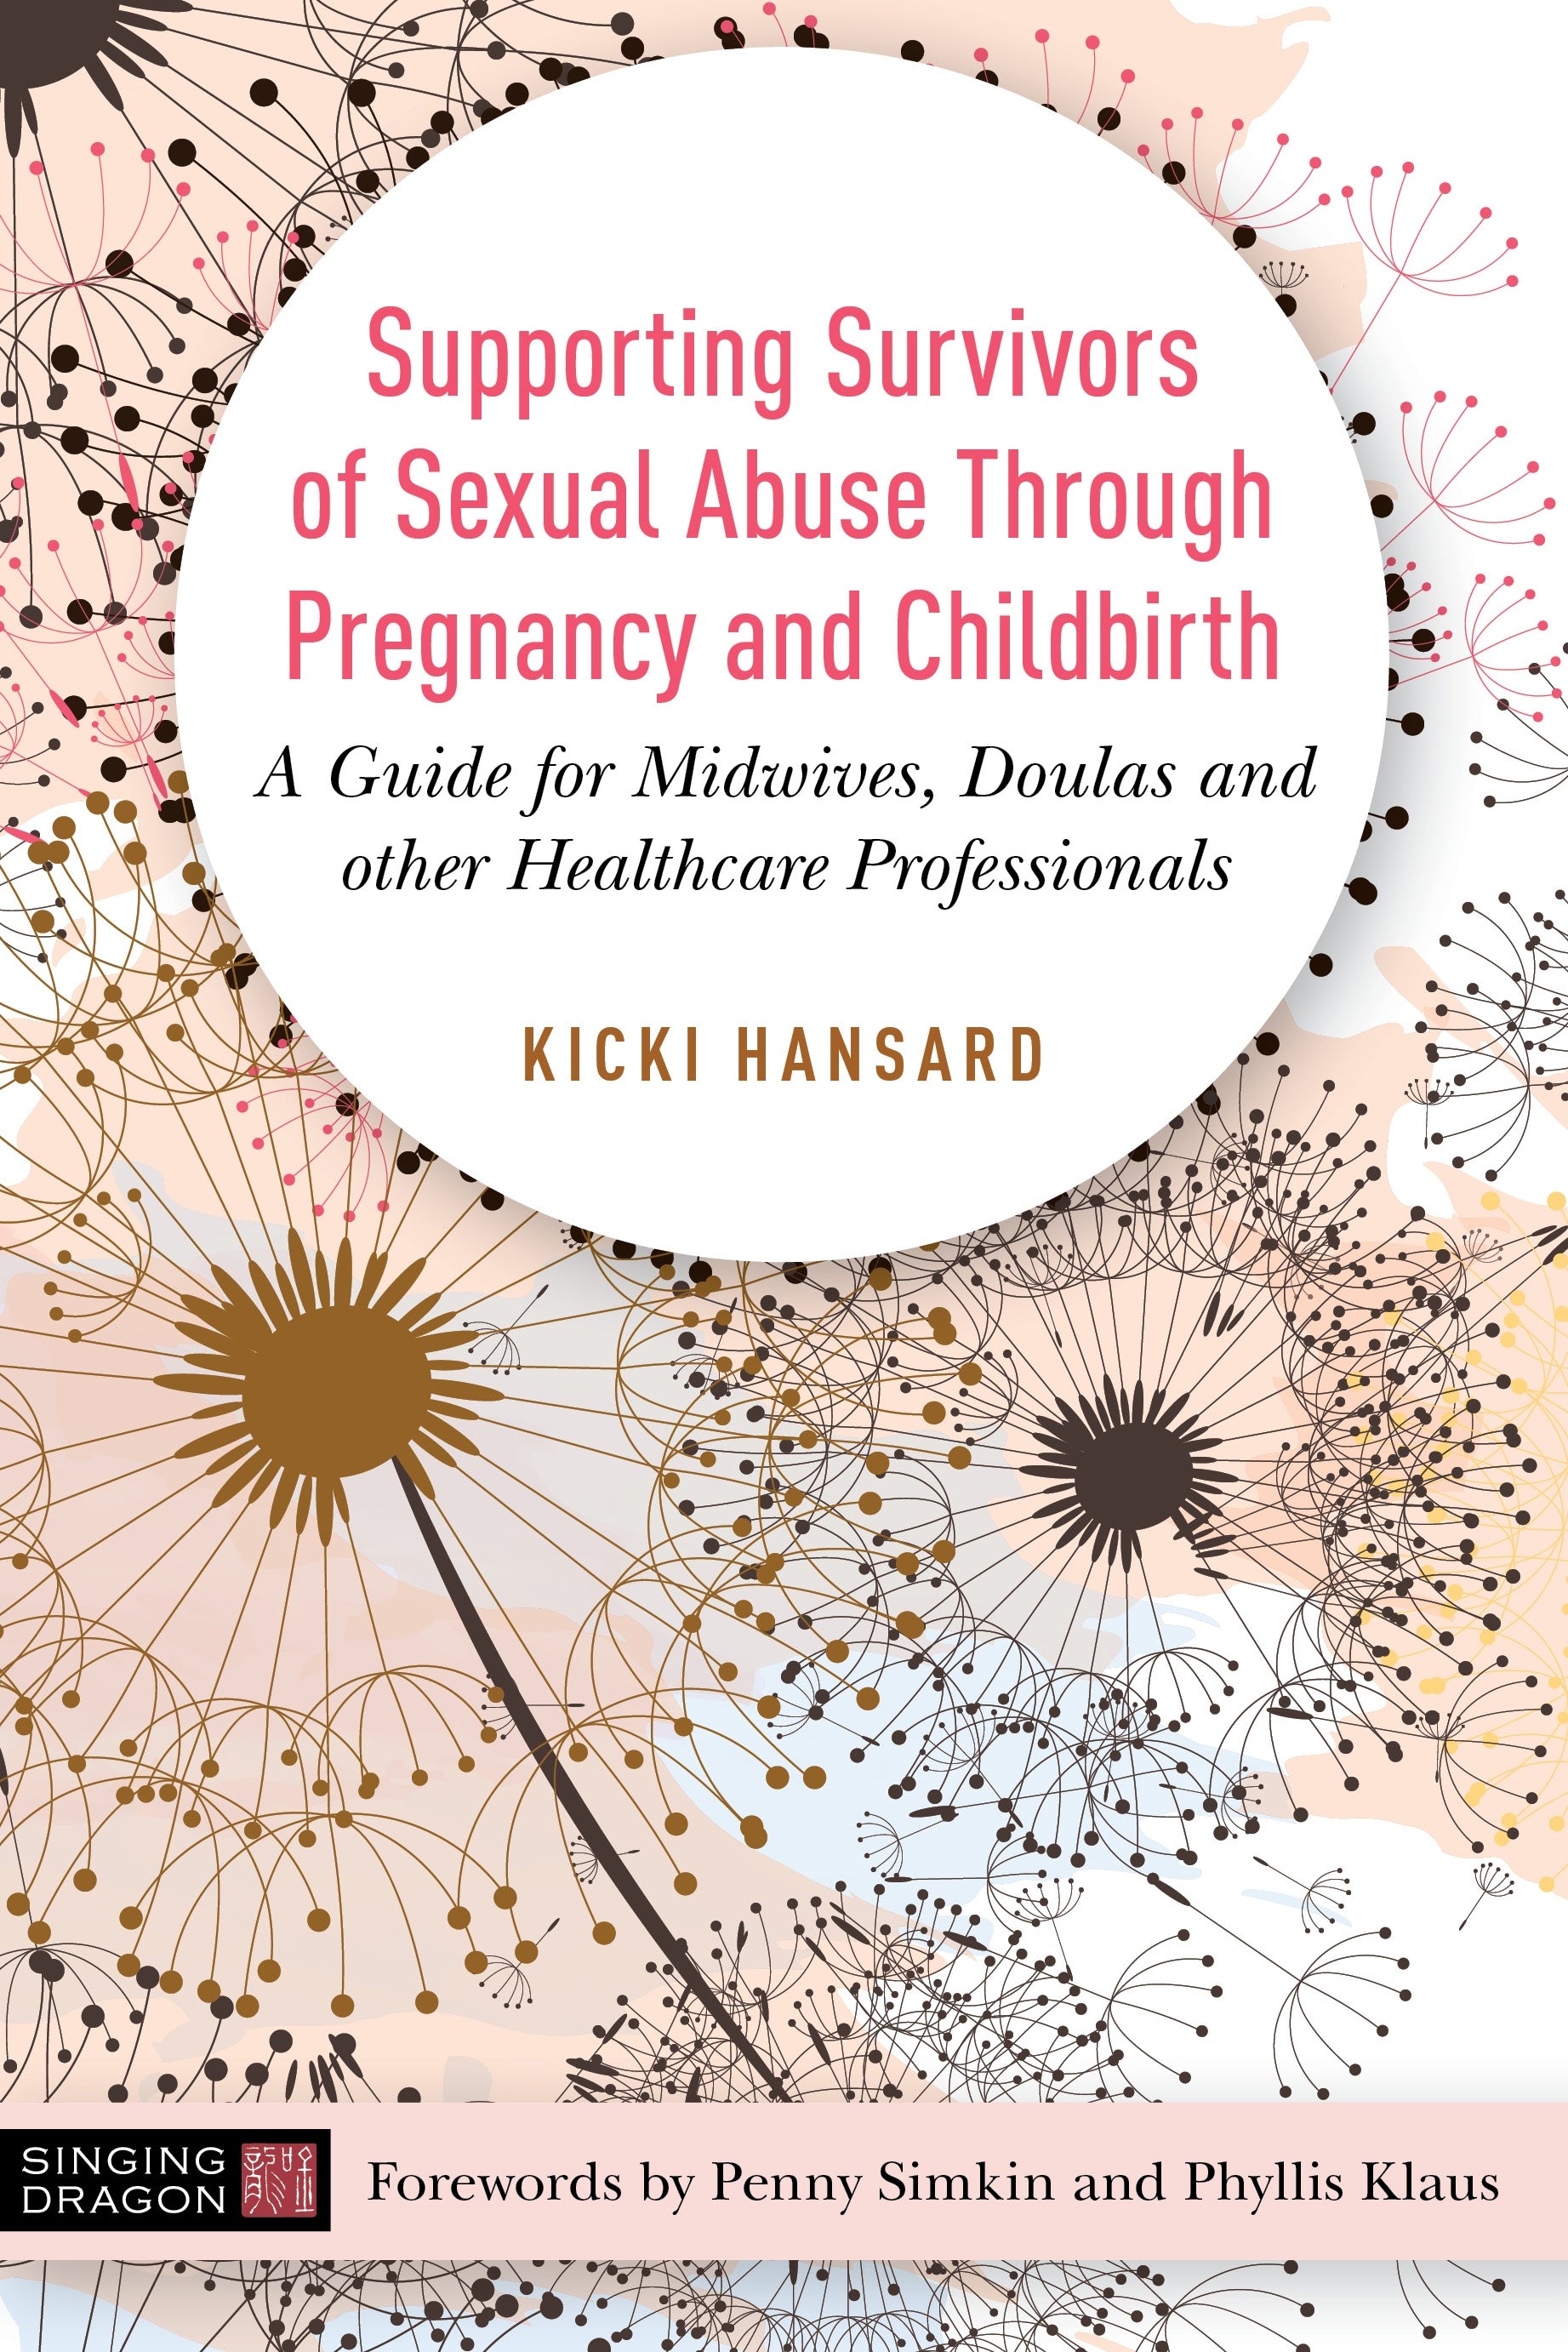 Supporting Survivors of Sexual Abuse Through Pregnancy and Childbirth by Kicki Hansard, Penny Simkin, Phyllis Klaus